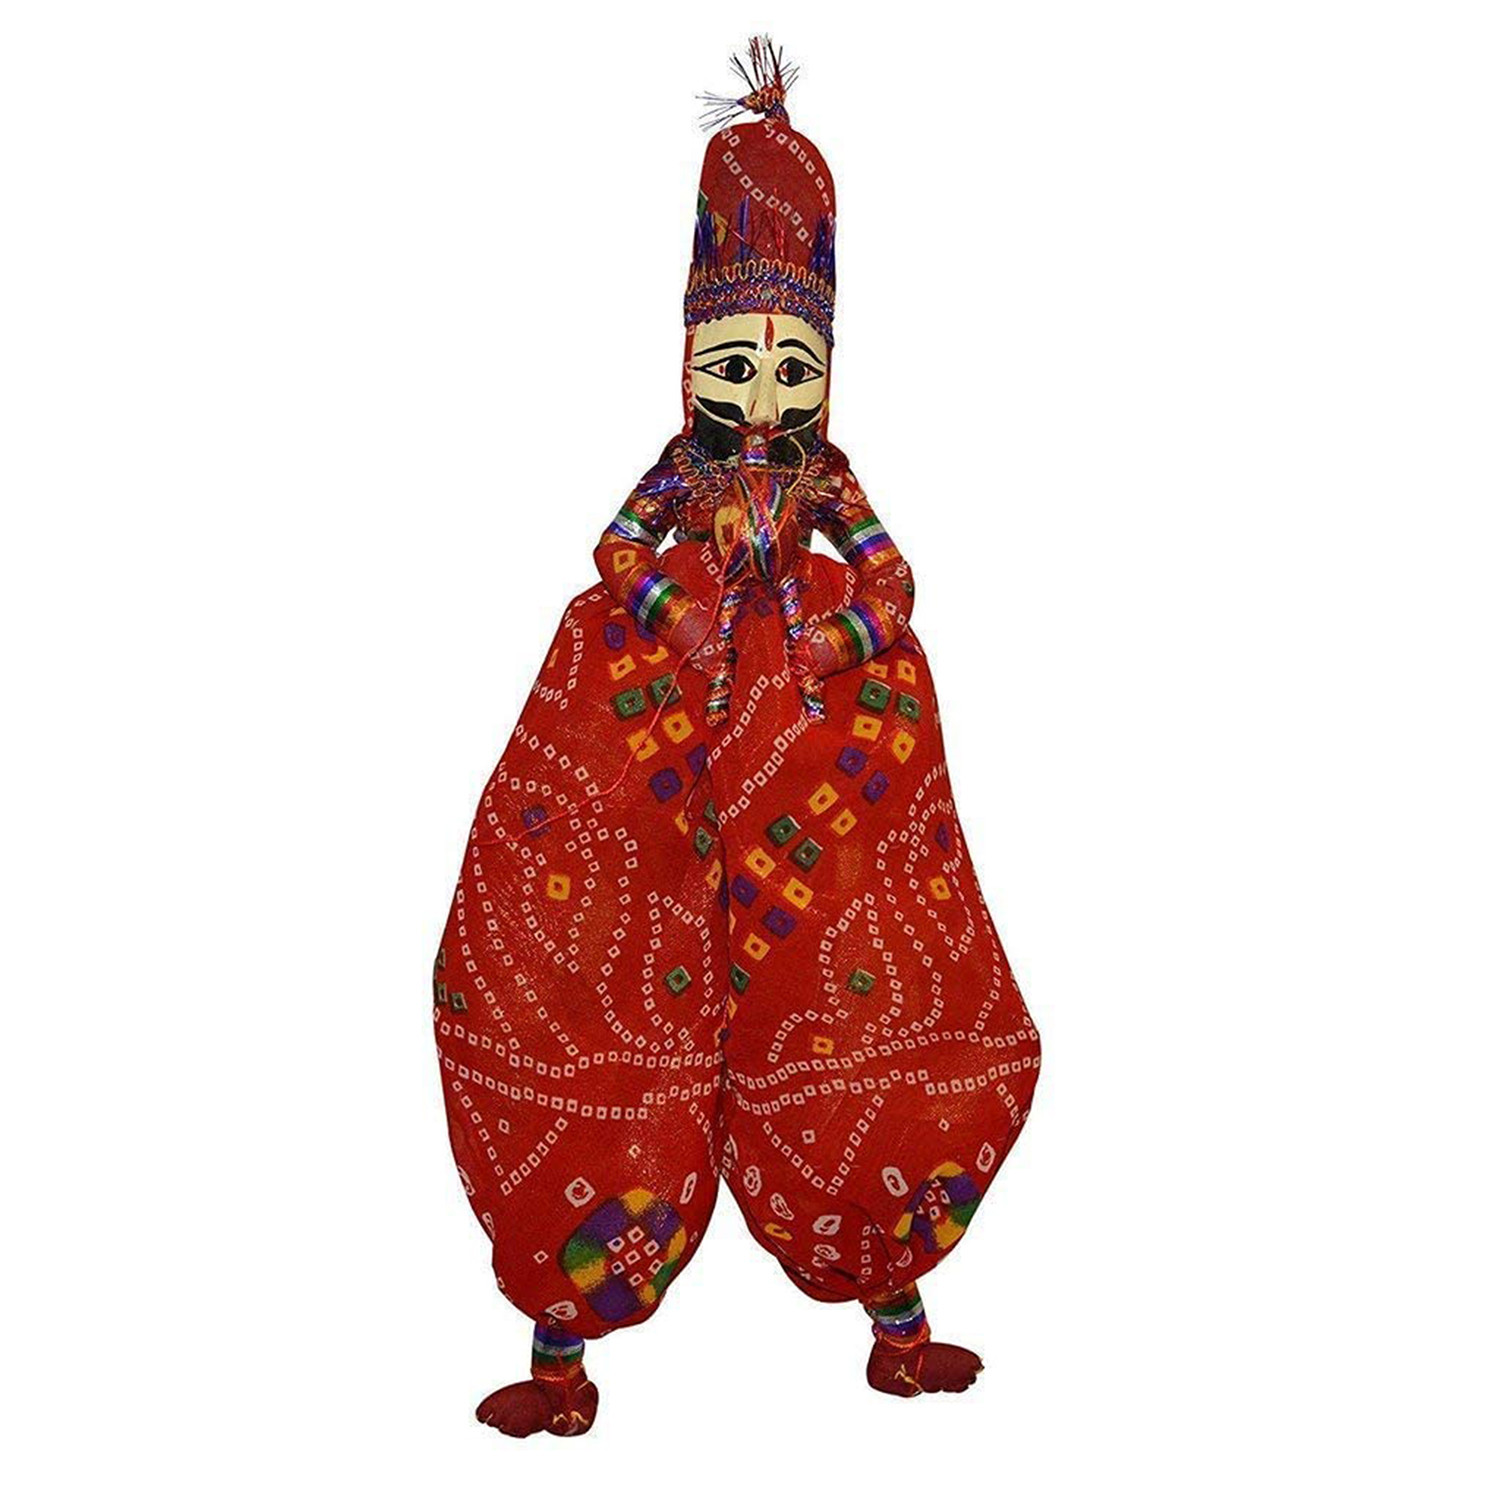 Kuber Industries Handcrafted Wood Folk Puppets Pair|Kathputli|Rajasthani Dolls Art For Cultural Program & Home Décor (Red)